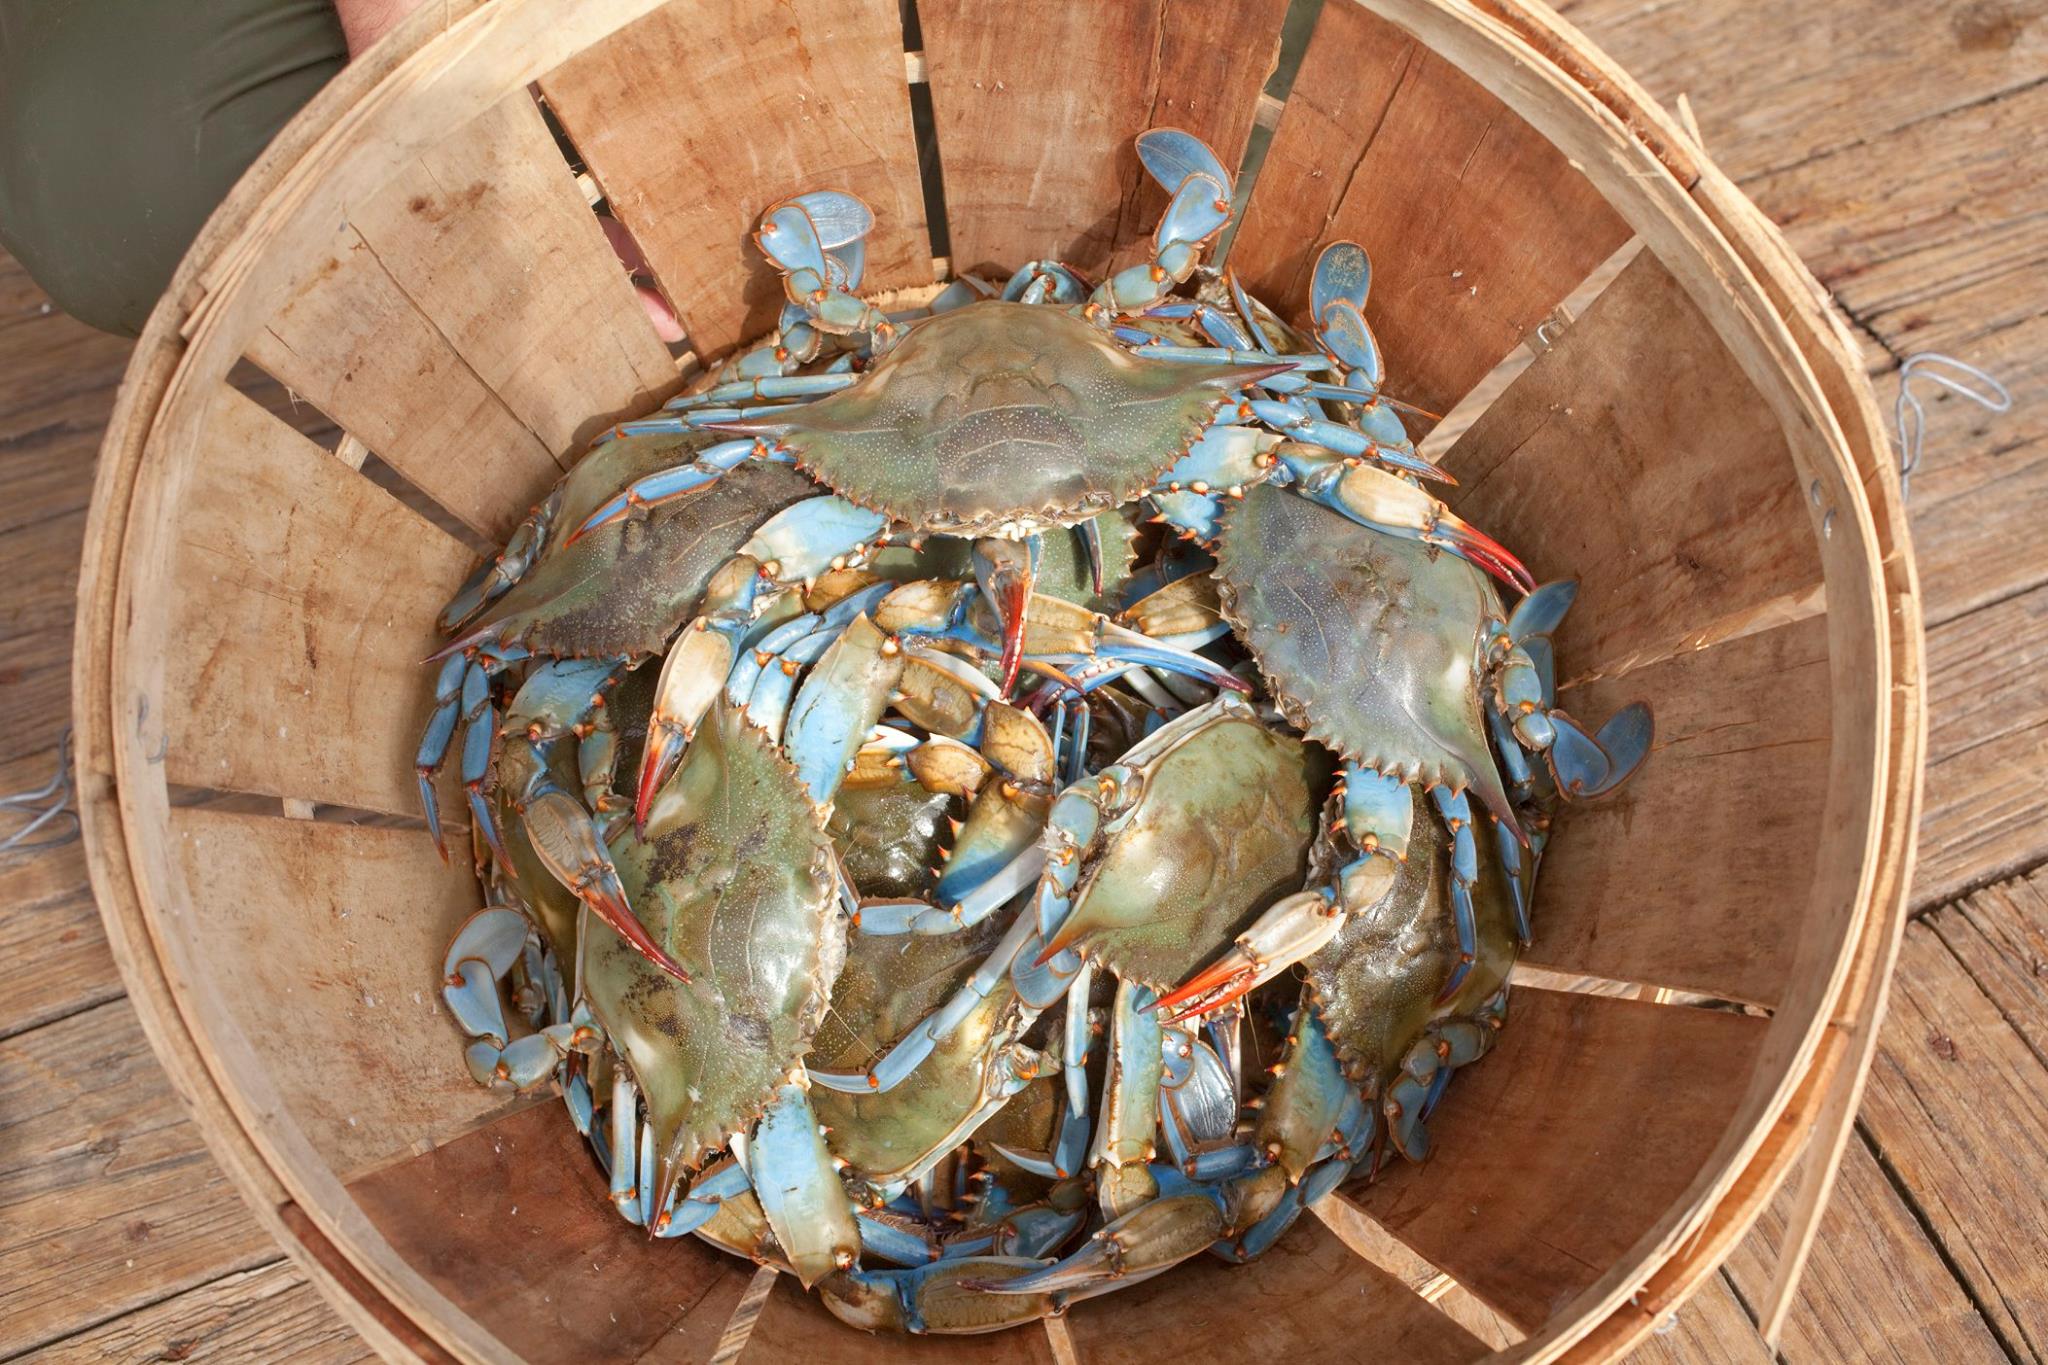 Louisiana_Blue_Crab_Louisiana_Seafood_Marketing_and_Promotions_Board_Deanies_Seafood_Restaurant_New_Orleans.jpg